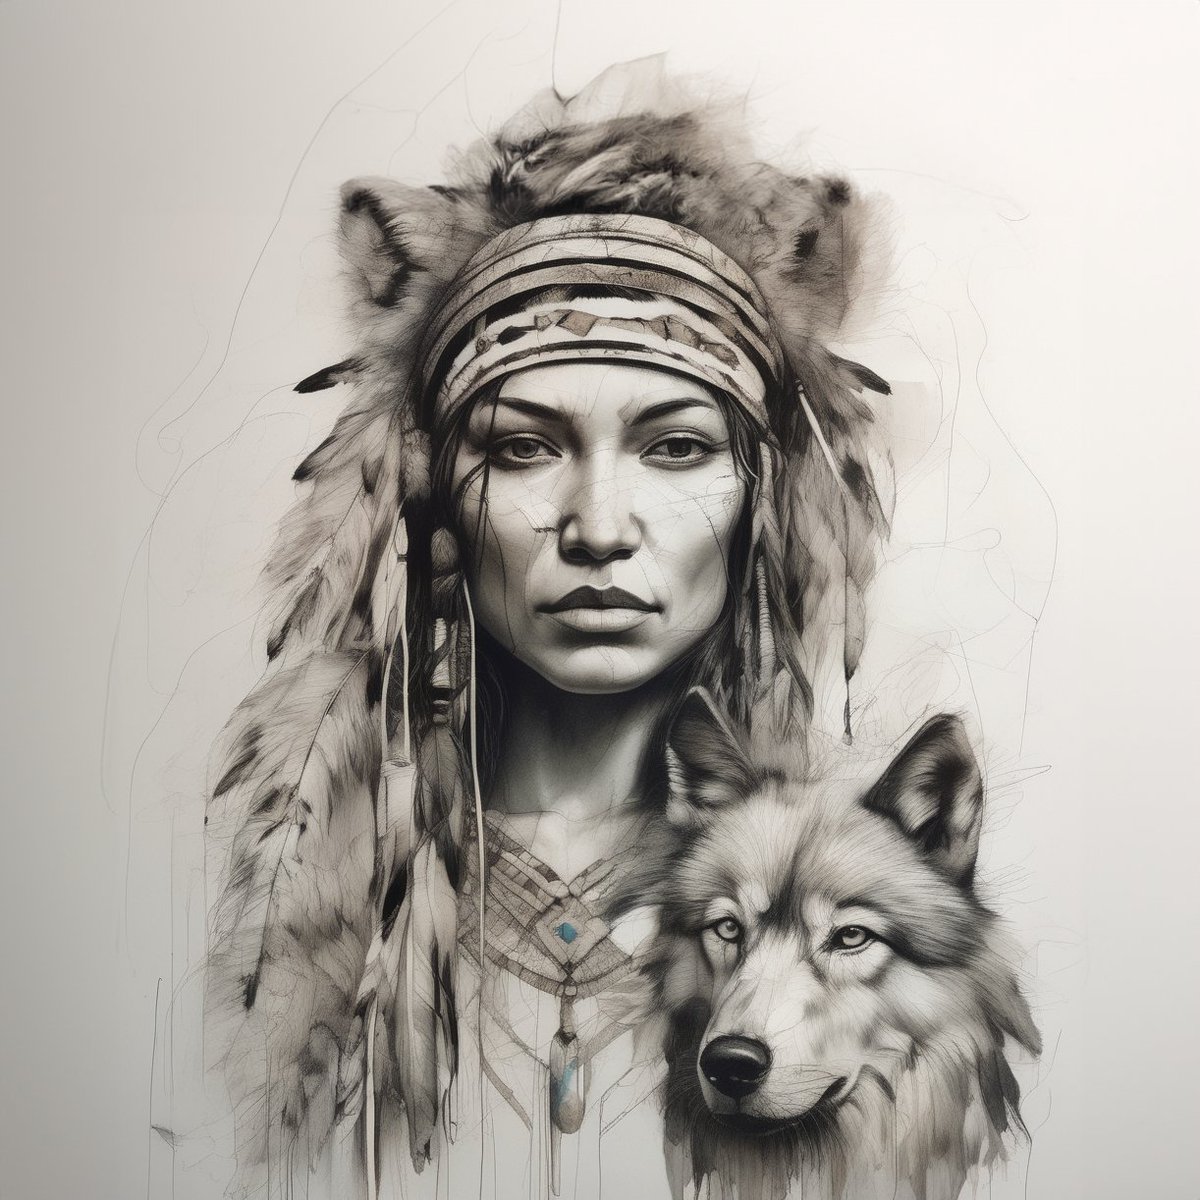 'Spirit of the Wild' 🌟 An inspiring portrayal of the bond between a  Native American woman and a wolf. 🐺 Explore the untamed spirit in  this vibrant artwork. #ArtisticInspiration #NativeAmericanArt  #WolfSpirit #WildlifeArt #CulturalHeritage #NatureConnection  #UntamedBeauty